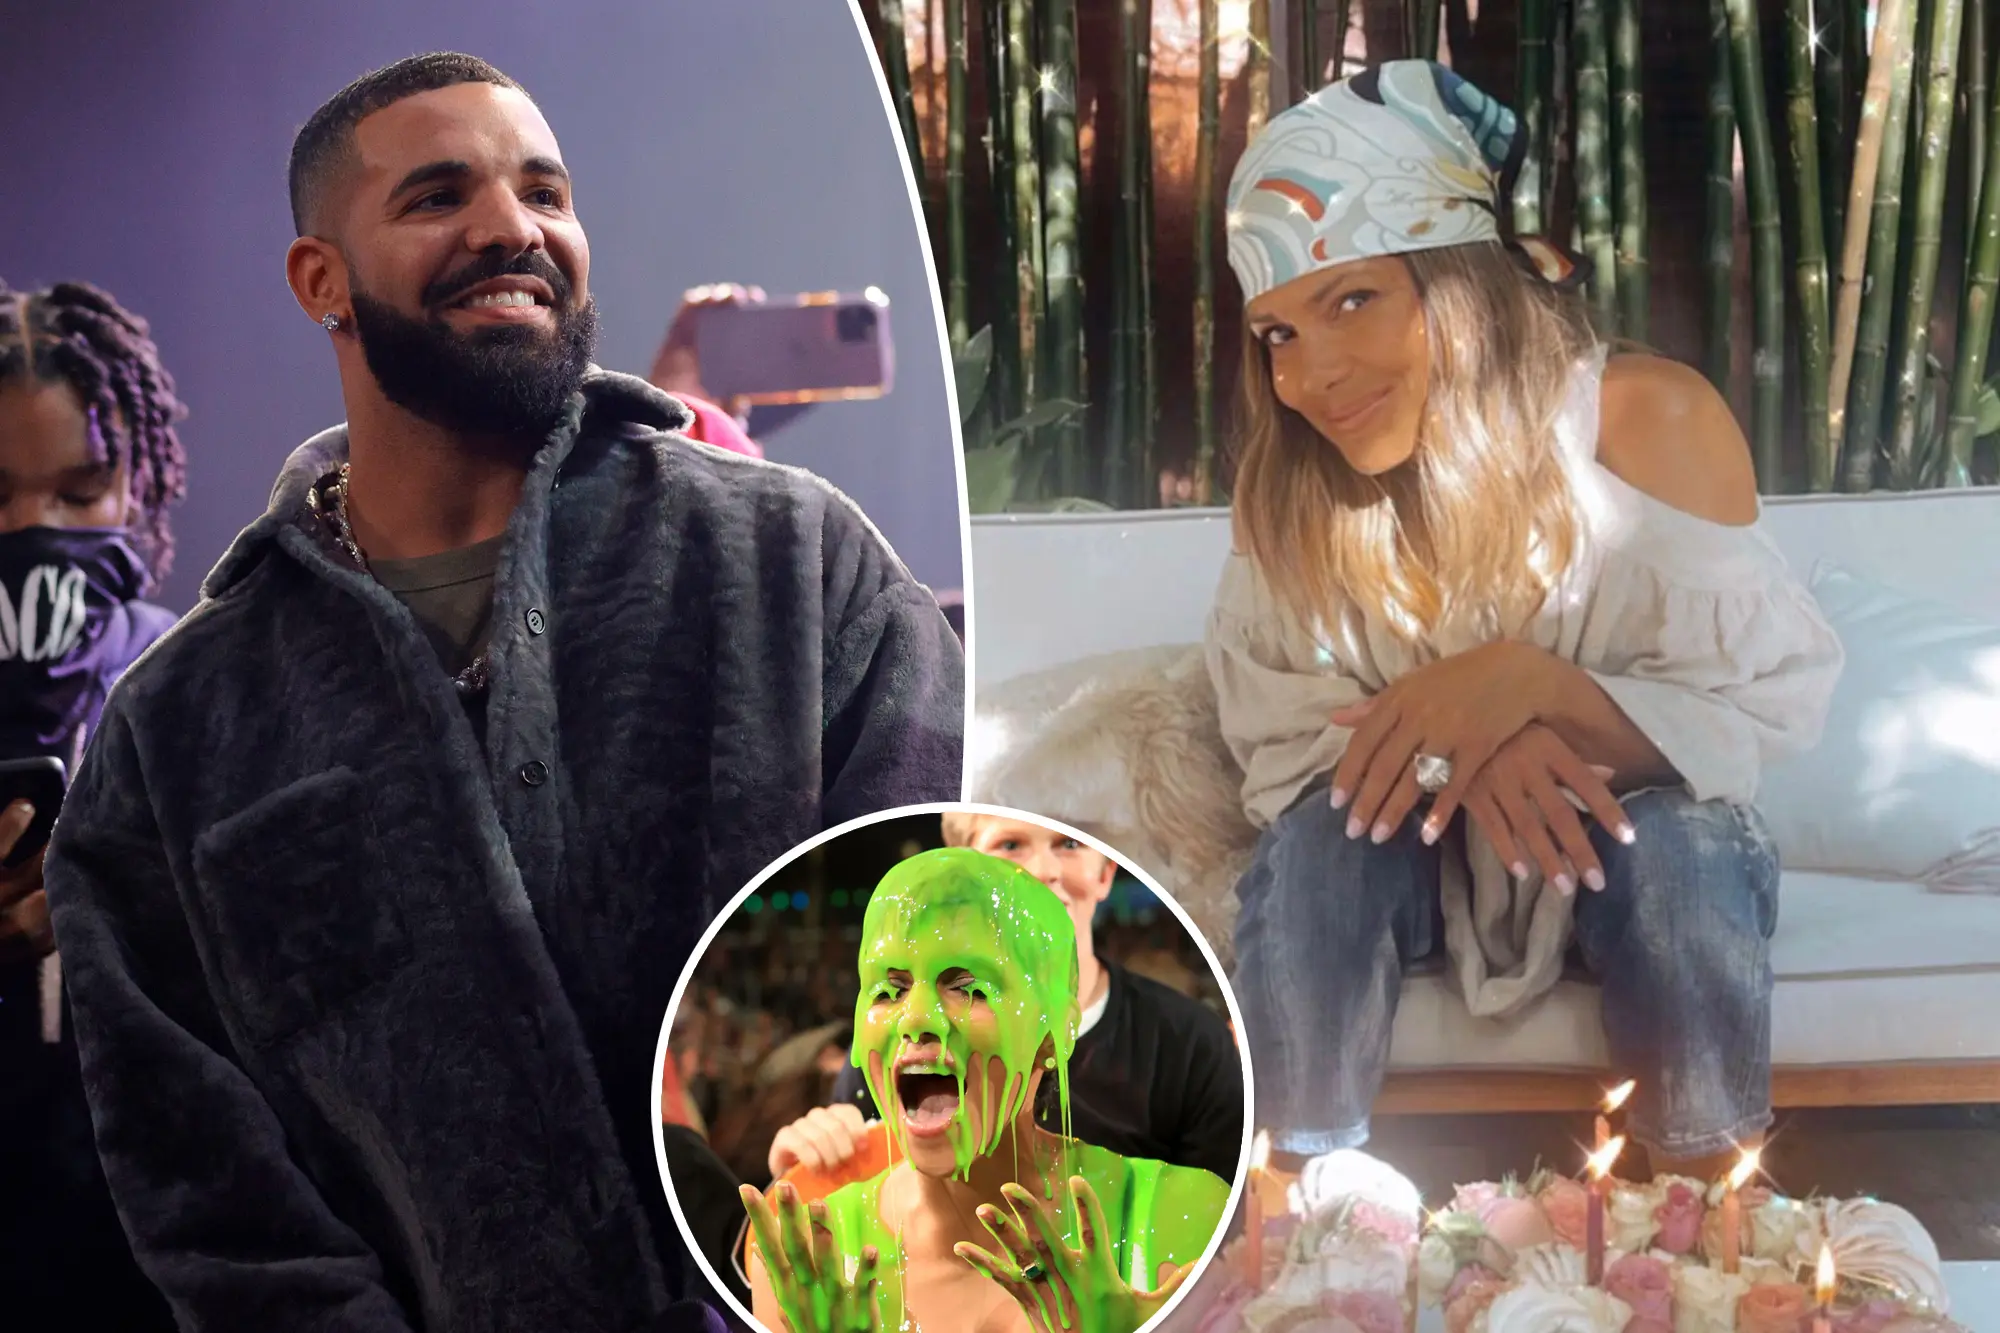 halle-berry-turns-down-drakes-request-to-use-slime-photo